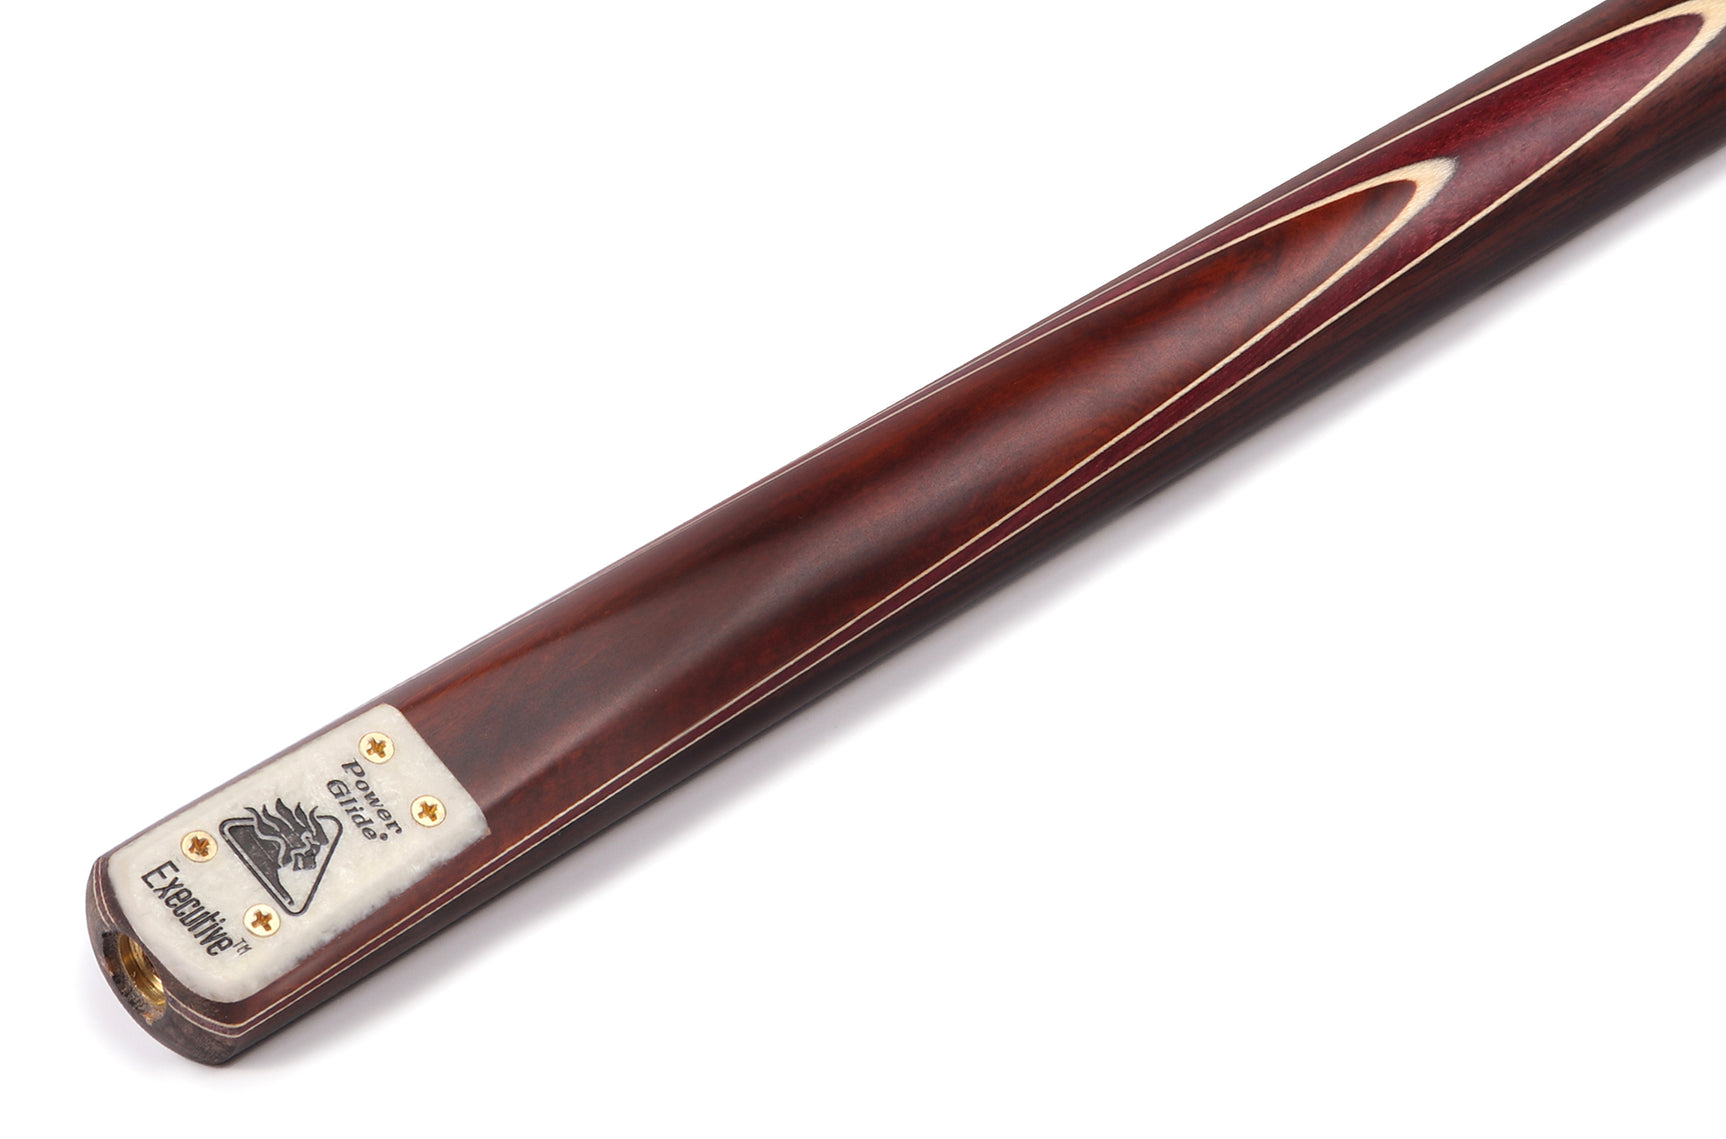 PowerGlide Executive 57 Inch 3/4 Joint Snooker Pool Cue 9.5mm Tip - Matching Mini Butt Included